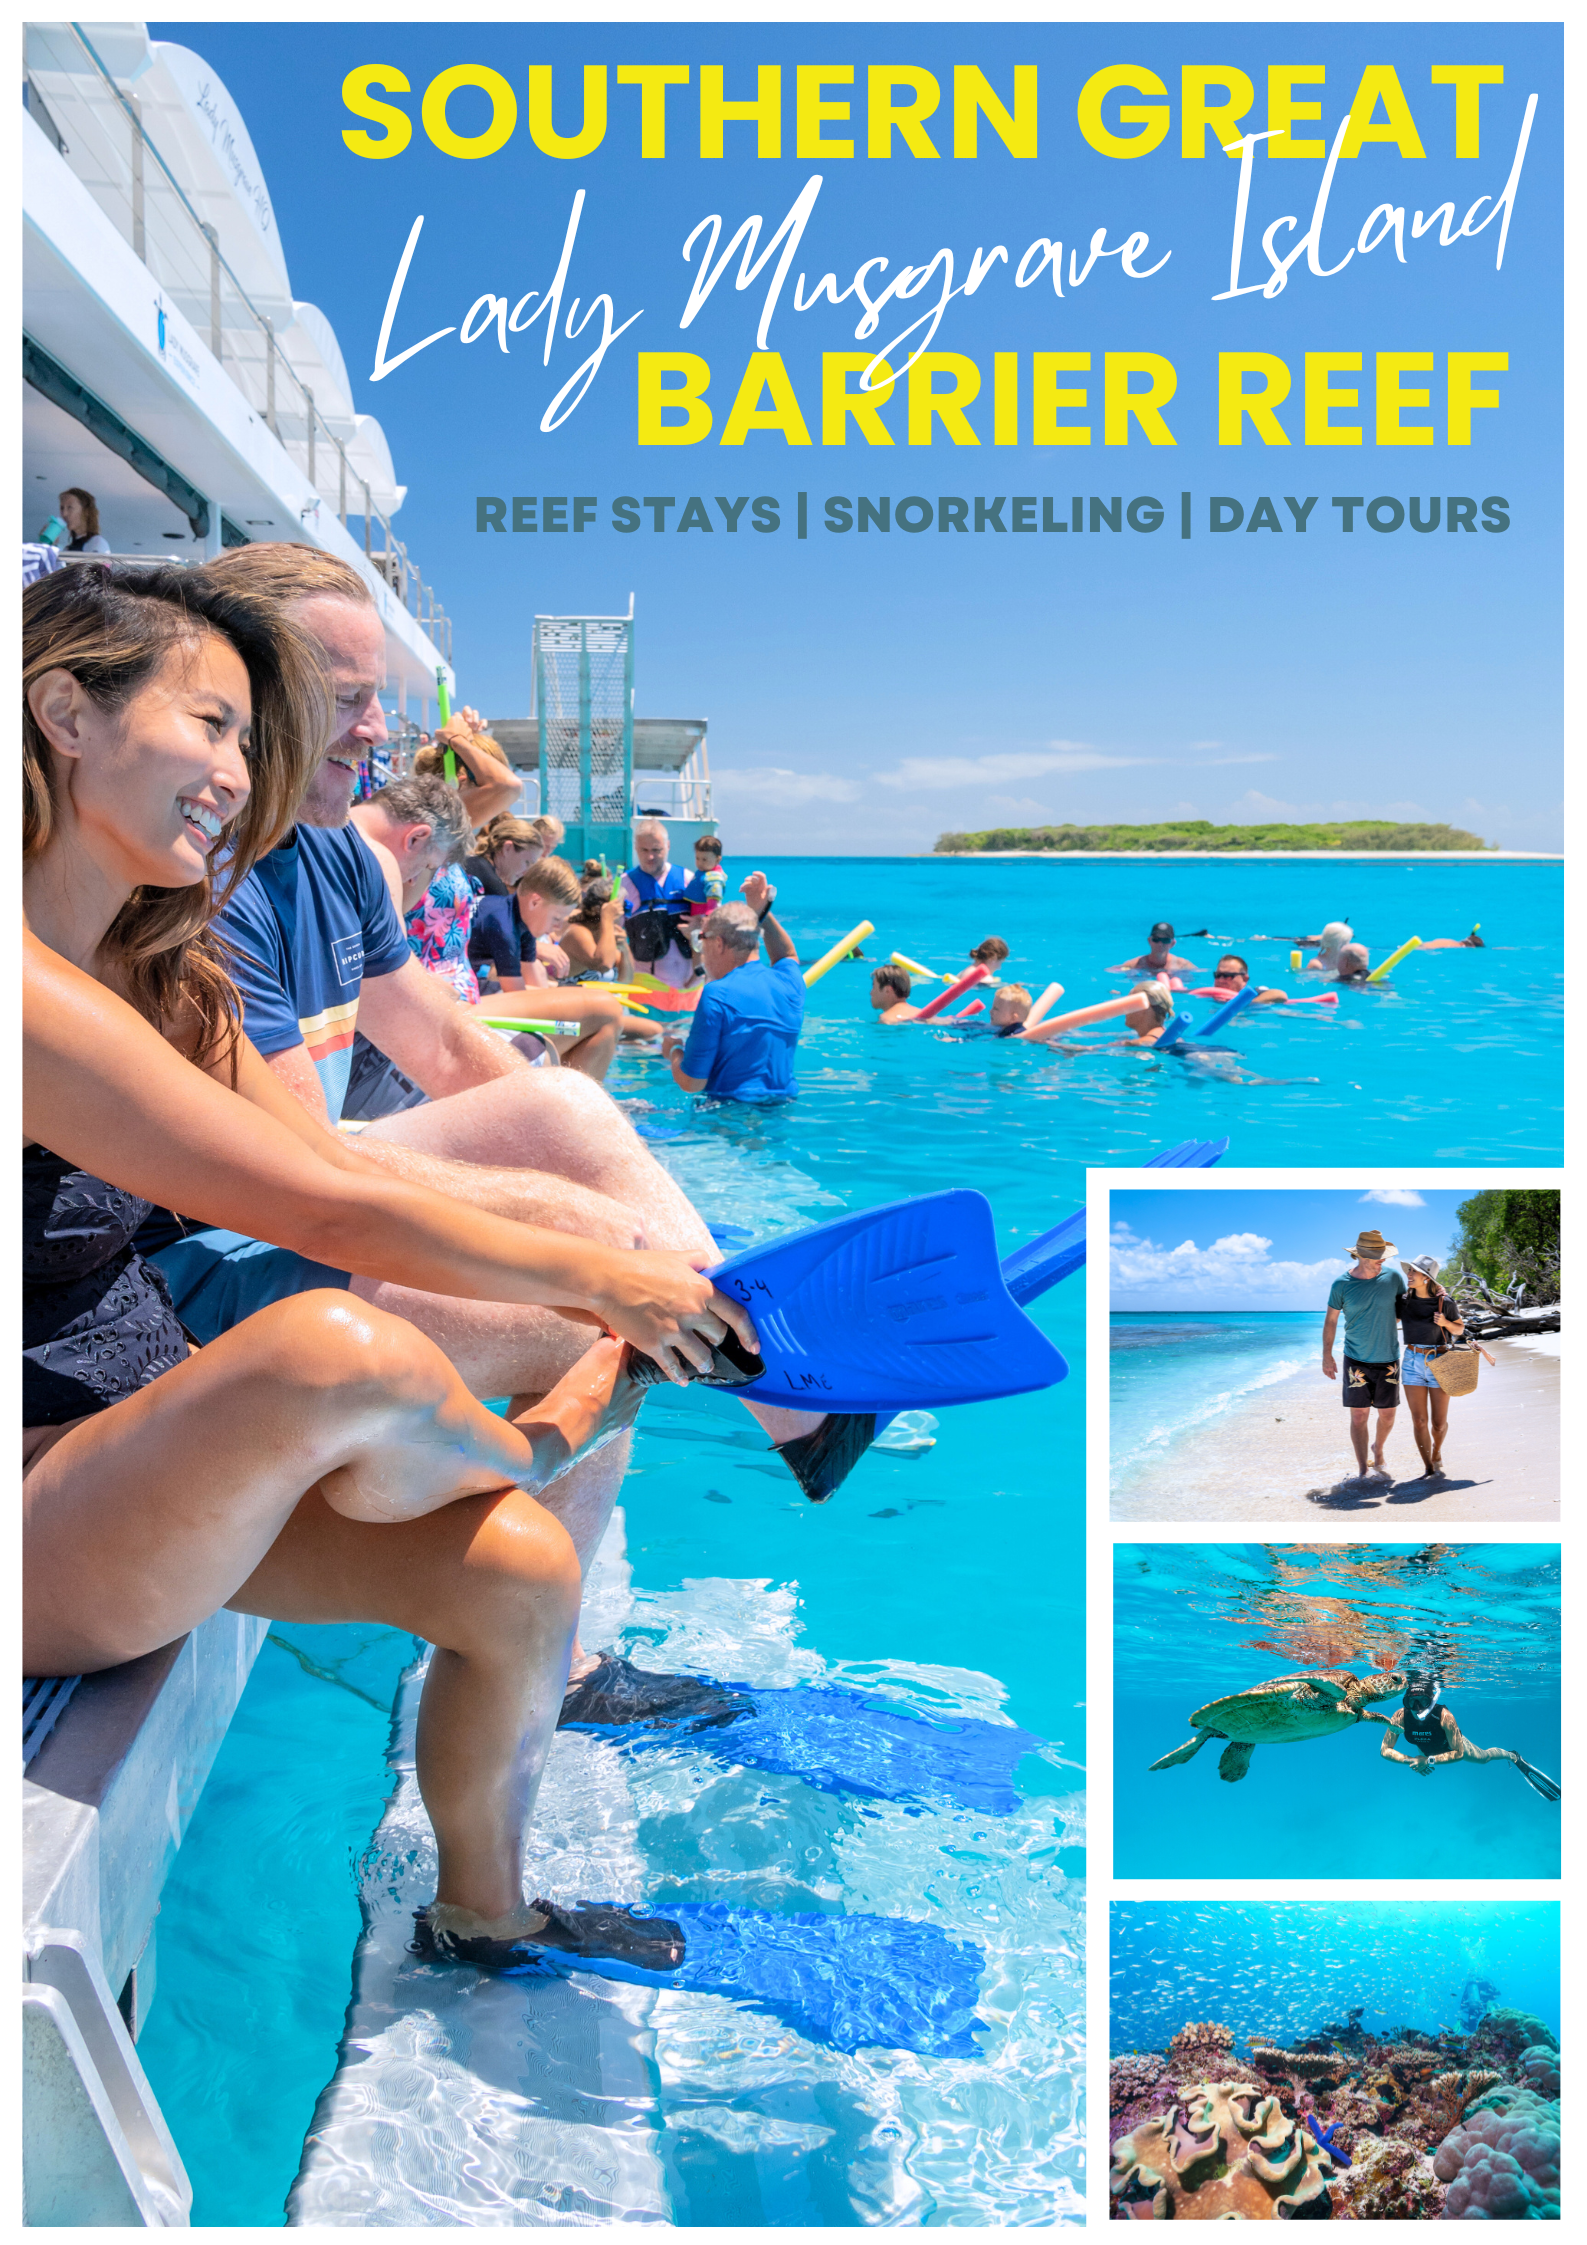 Lady Musgrave Experience Southern Great Barrier Reef Full Day Tour From April 2025- Departs Bundaberg